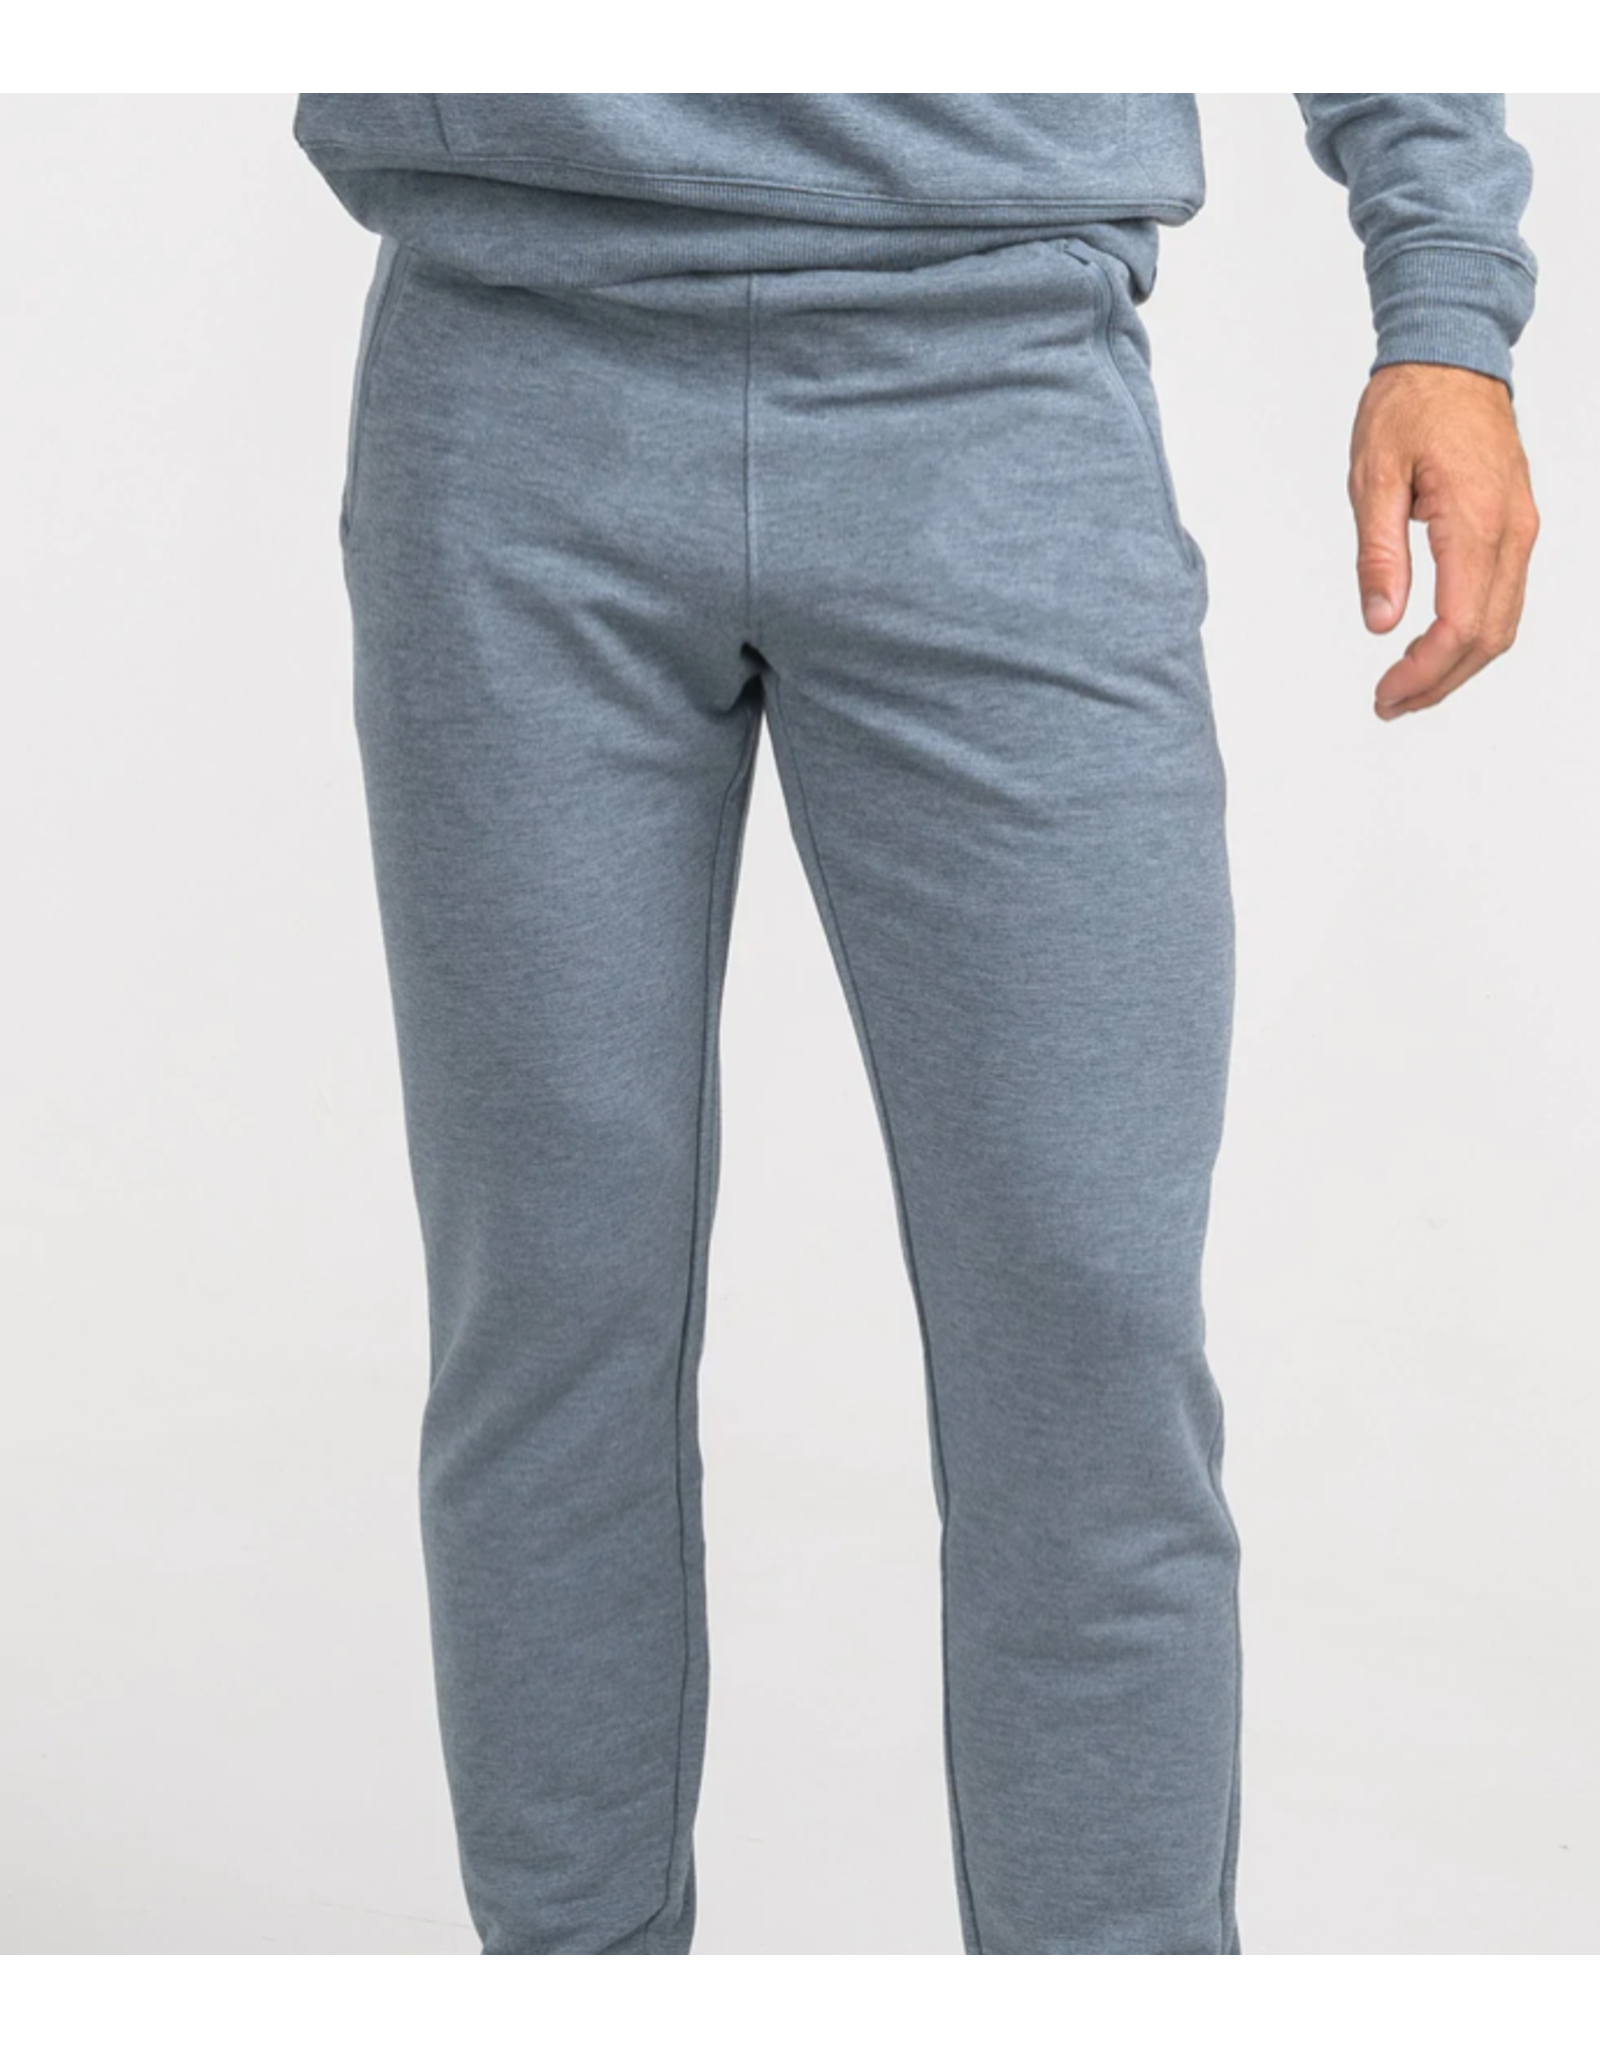 Southern Shirt Company Midtown Joggers Esquire Navy